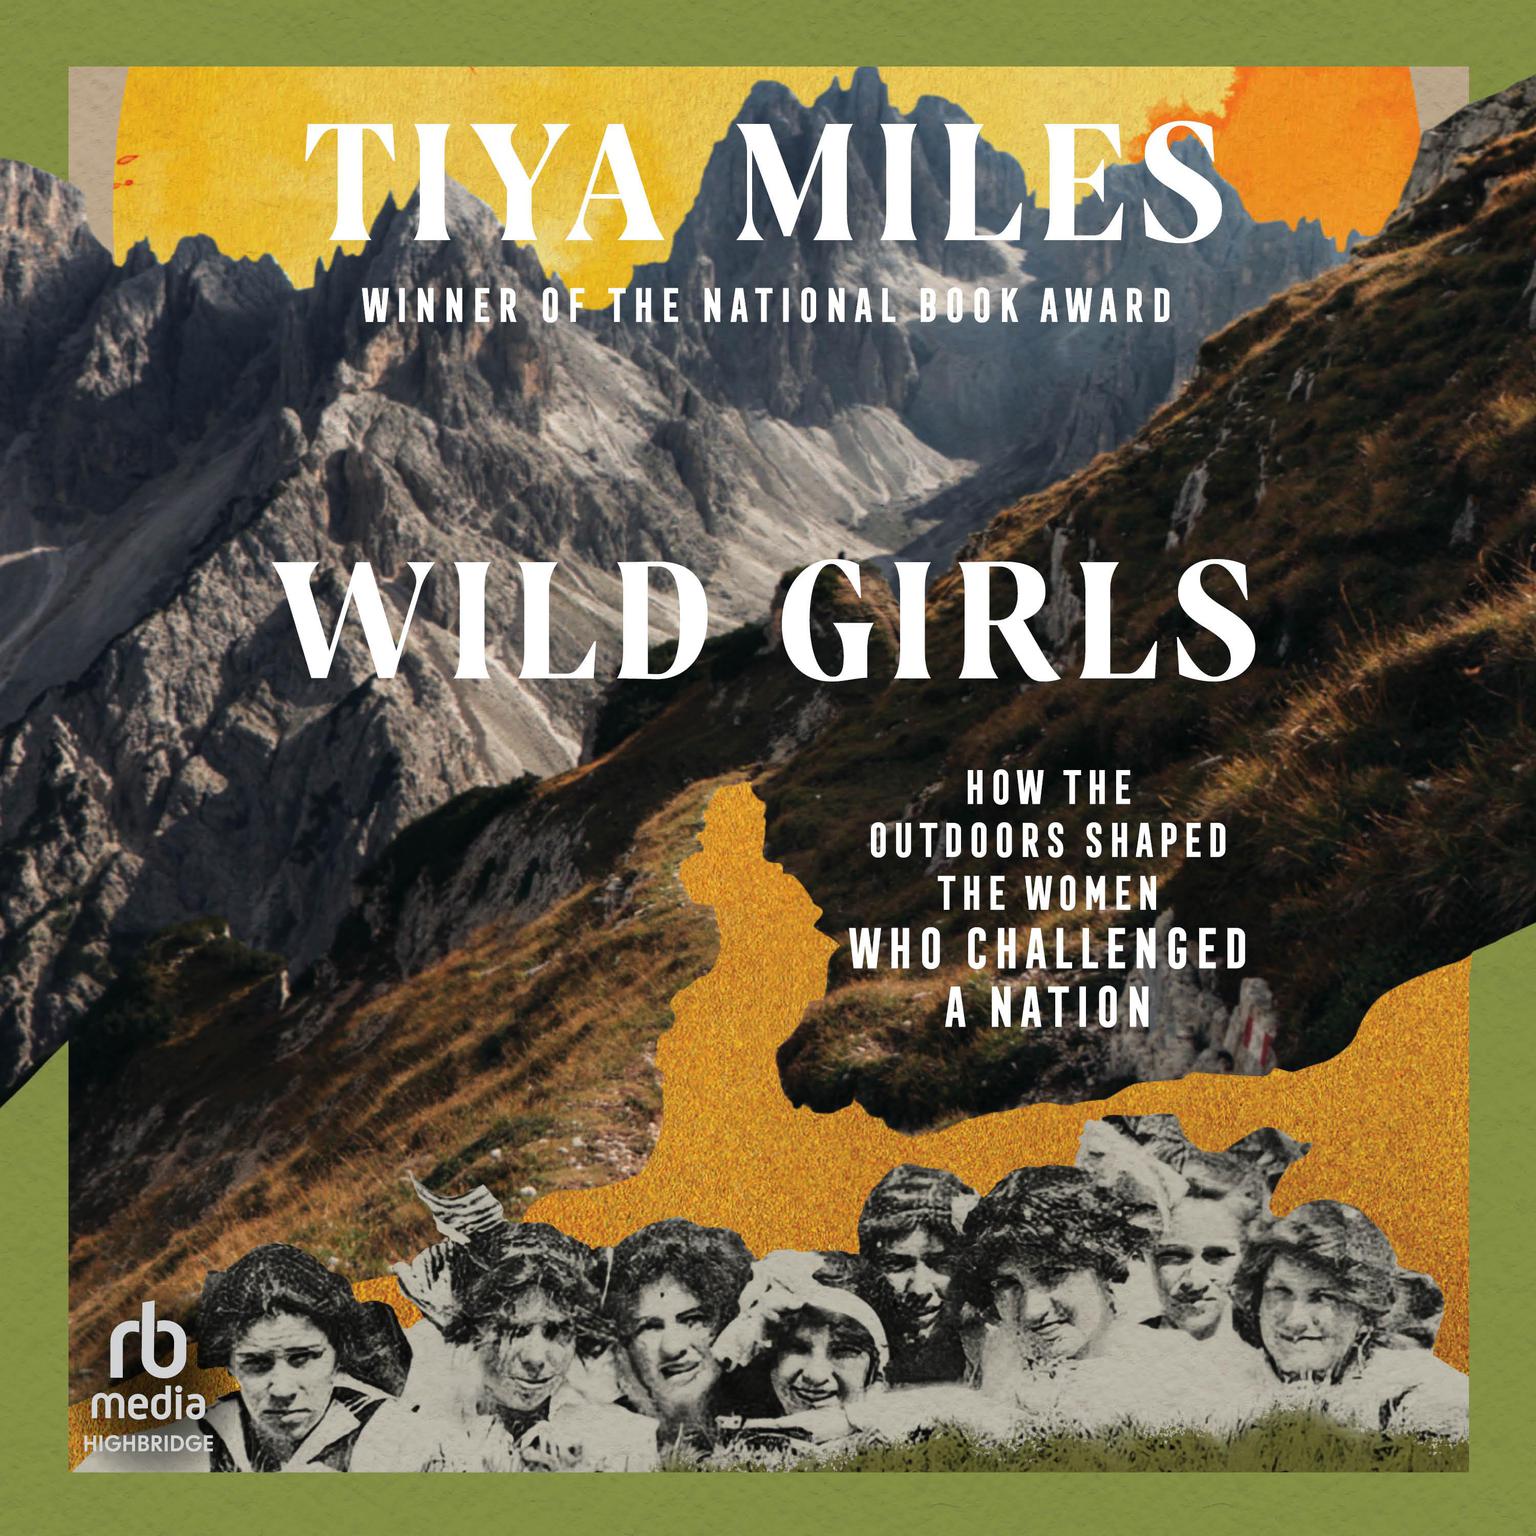 Wild Girls: How the Outdoors Shaped the Women Who Challenged a Nation Audiobook, by Tiya Miles